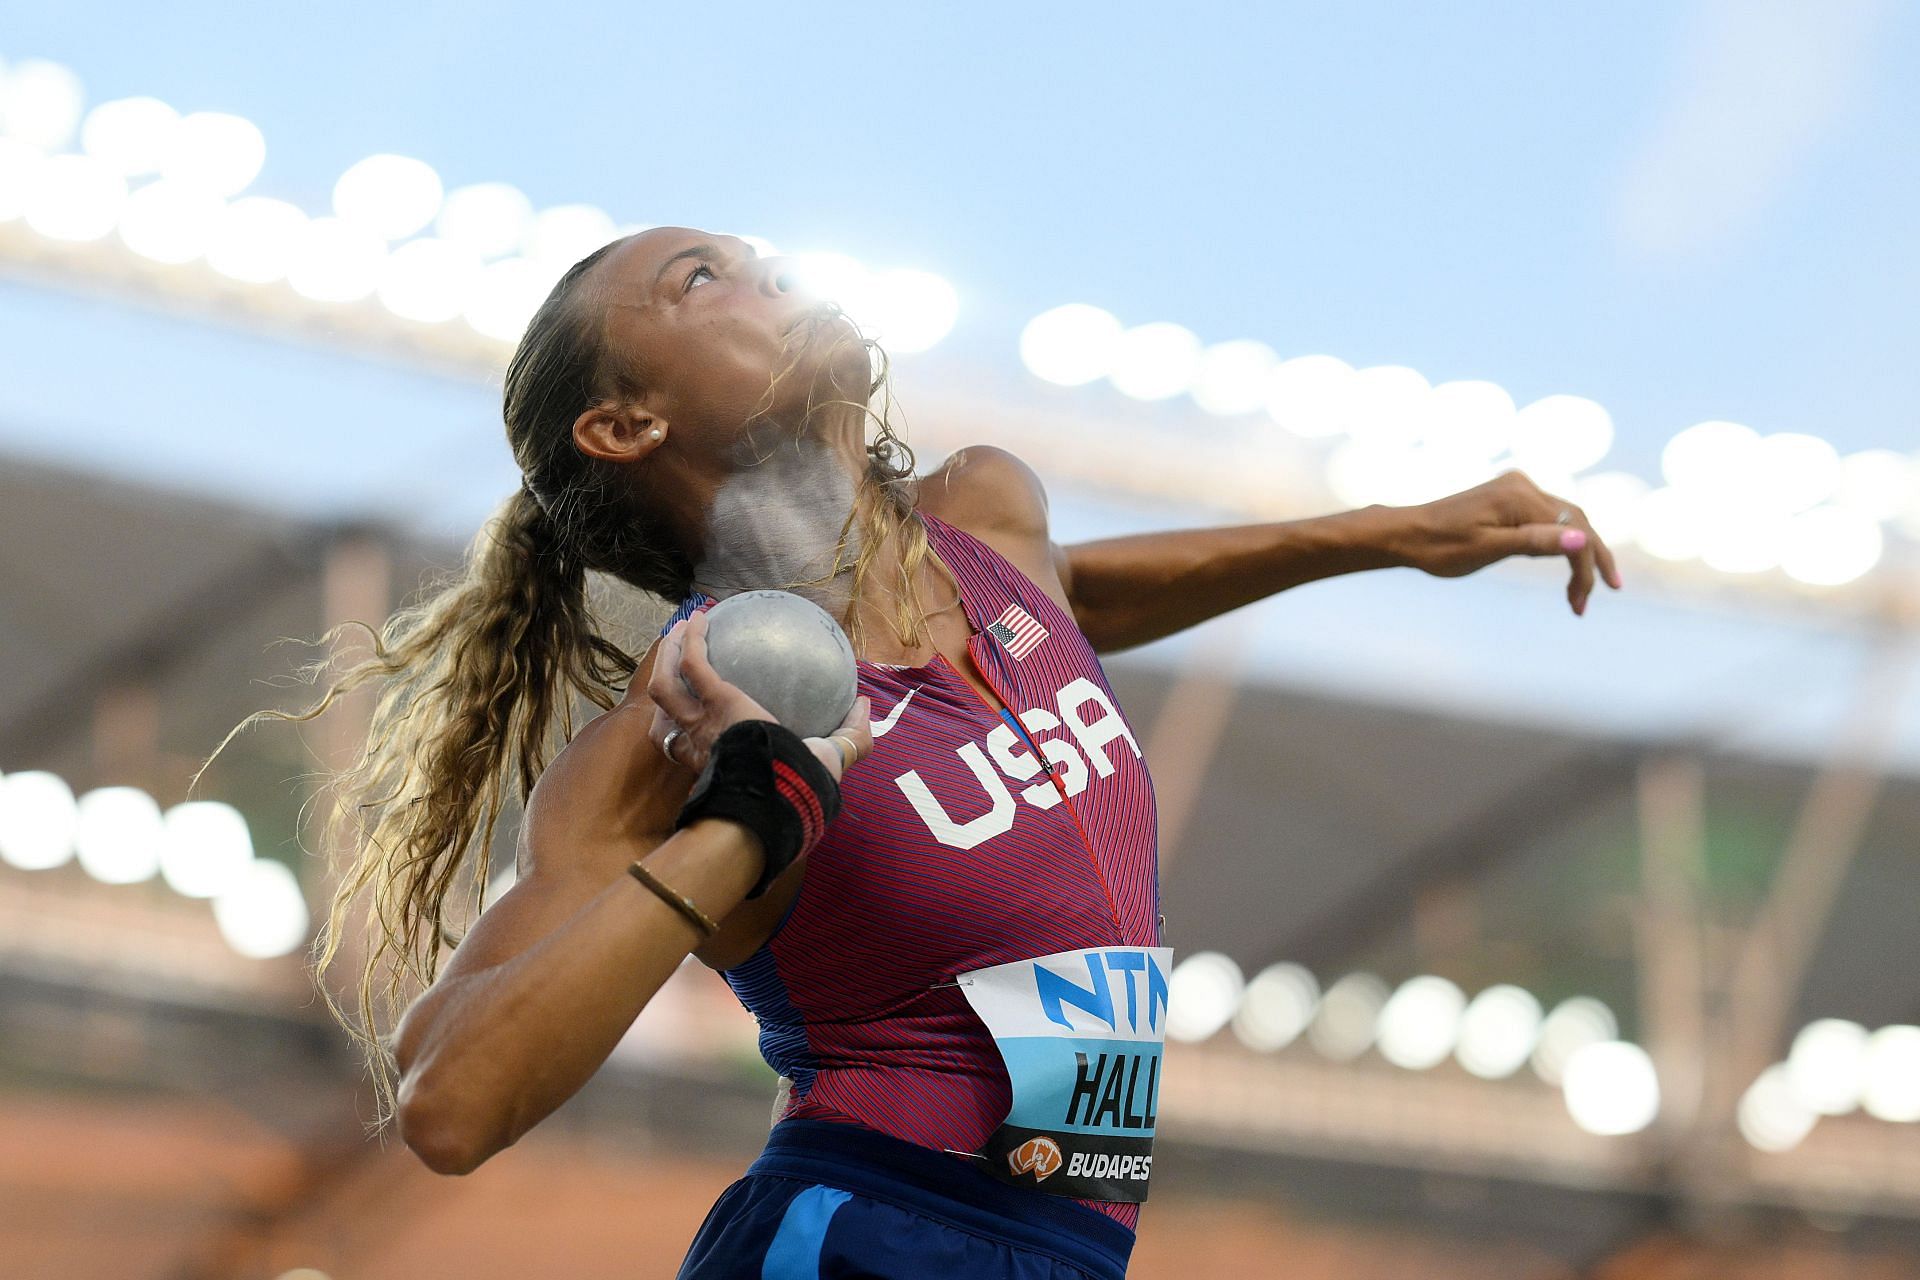 Anna Hall competes in the Shot Put event, part of the Heptathlon at the 2023 World Athletics Championships in Budapest, Hungary